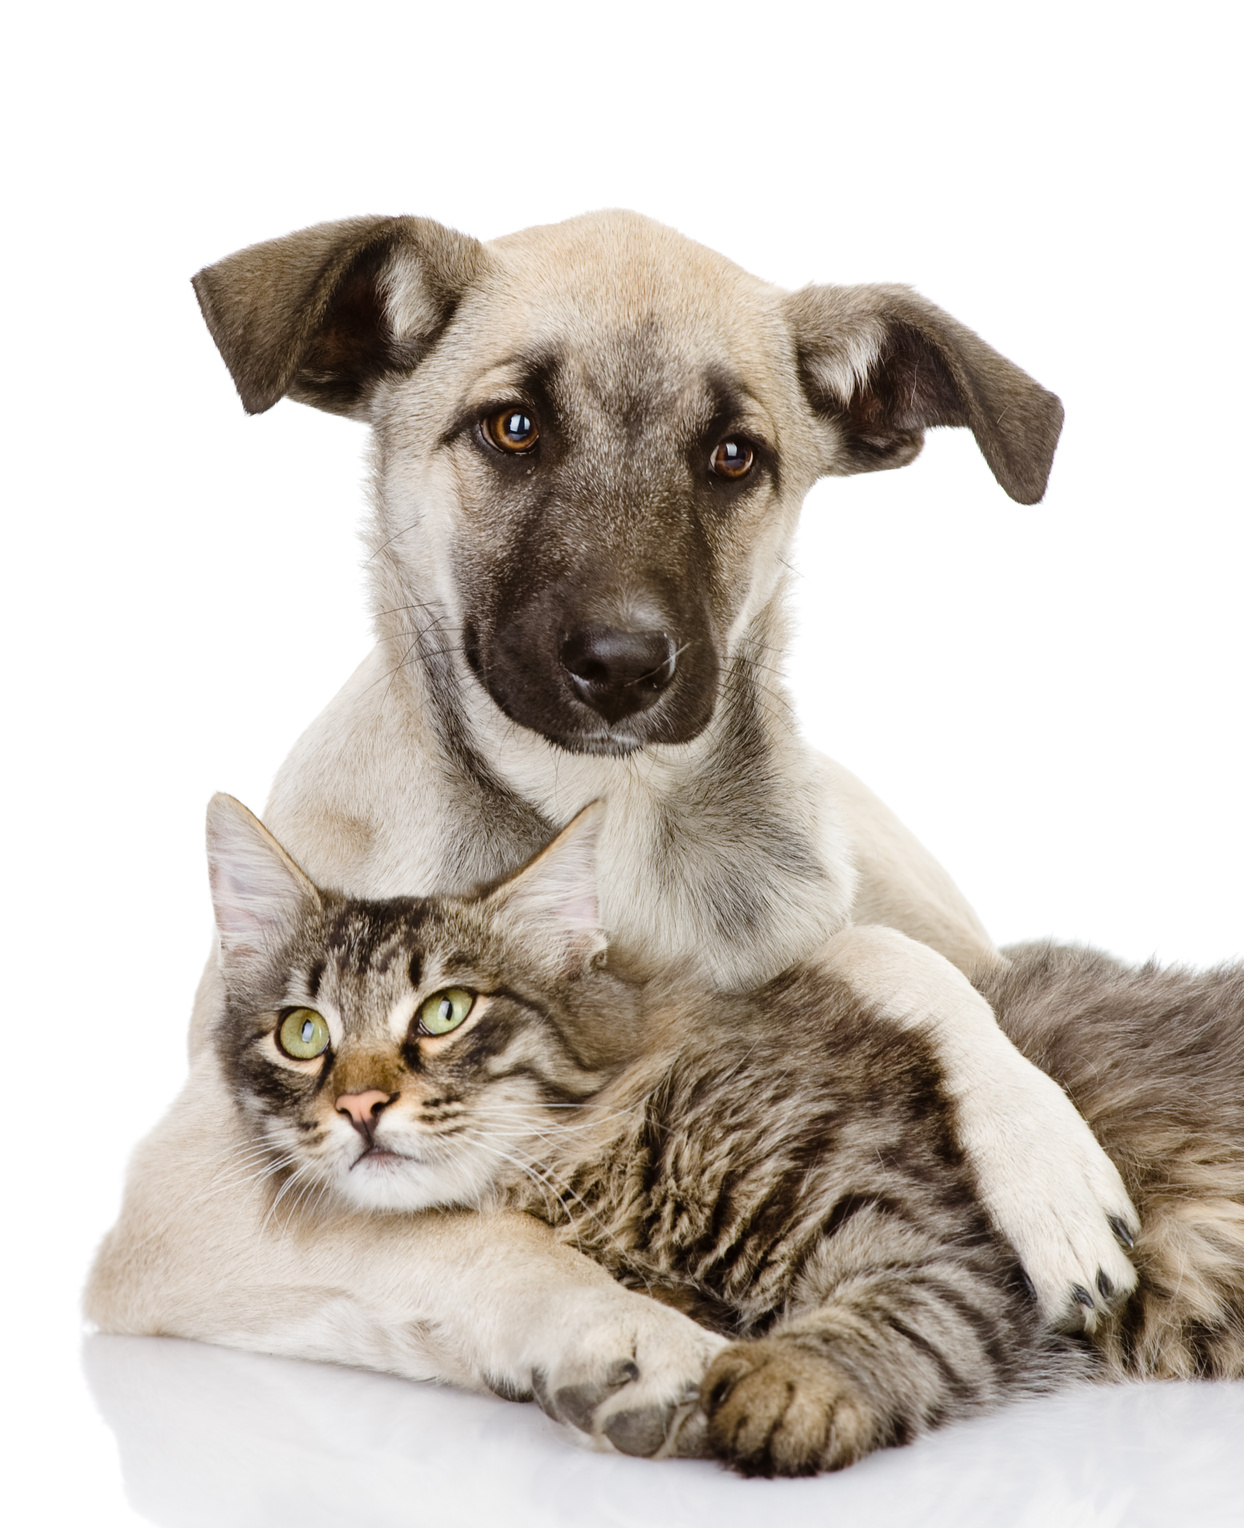 the-dog-hugs-a-cat-isolated-on-white-background